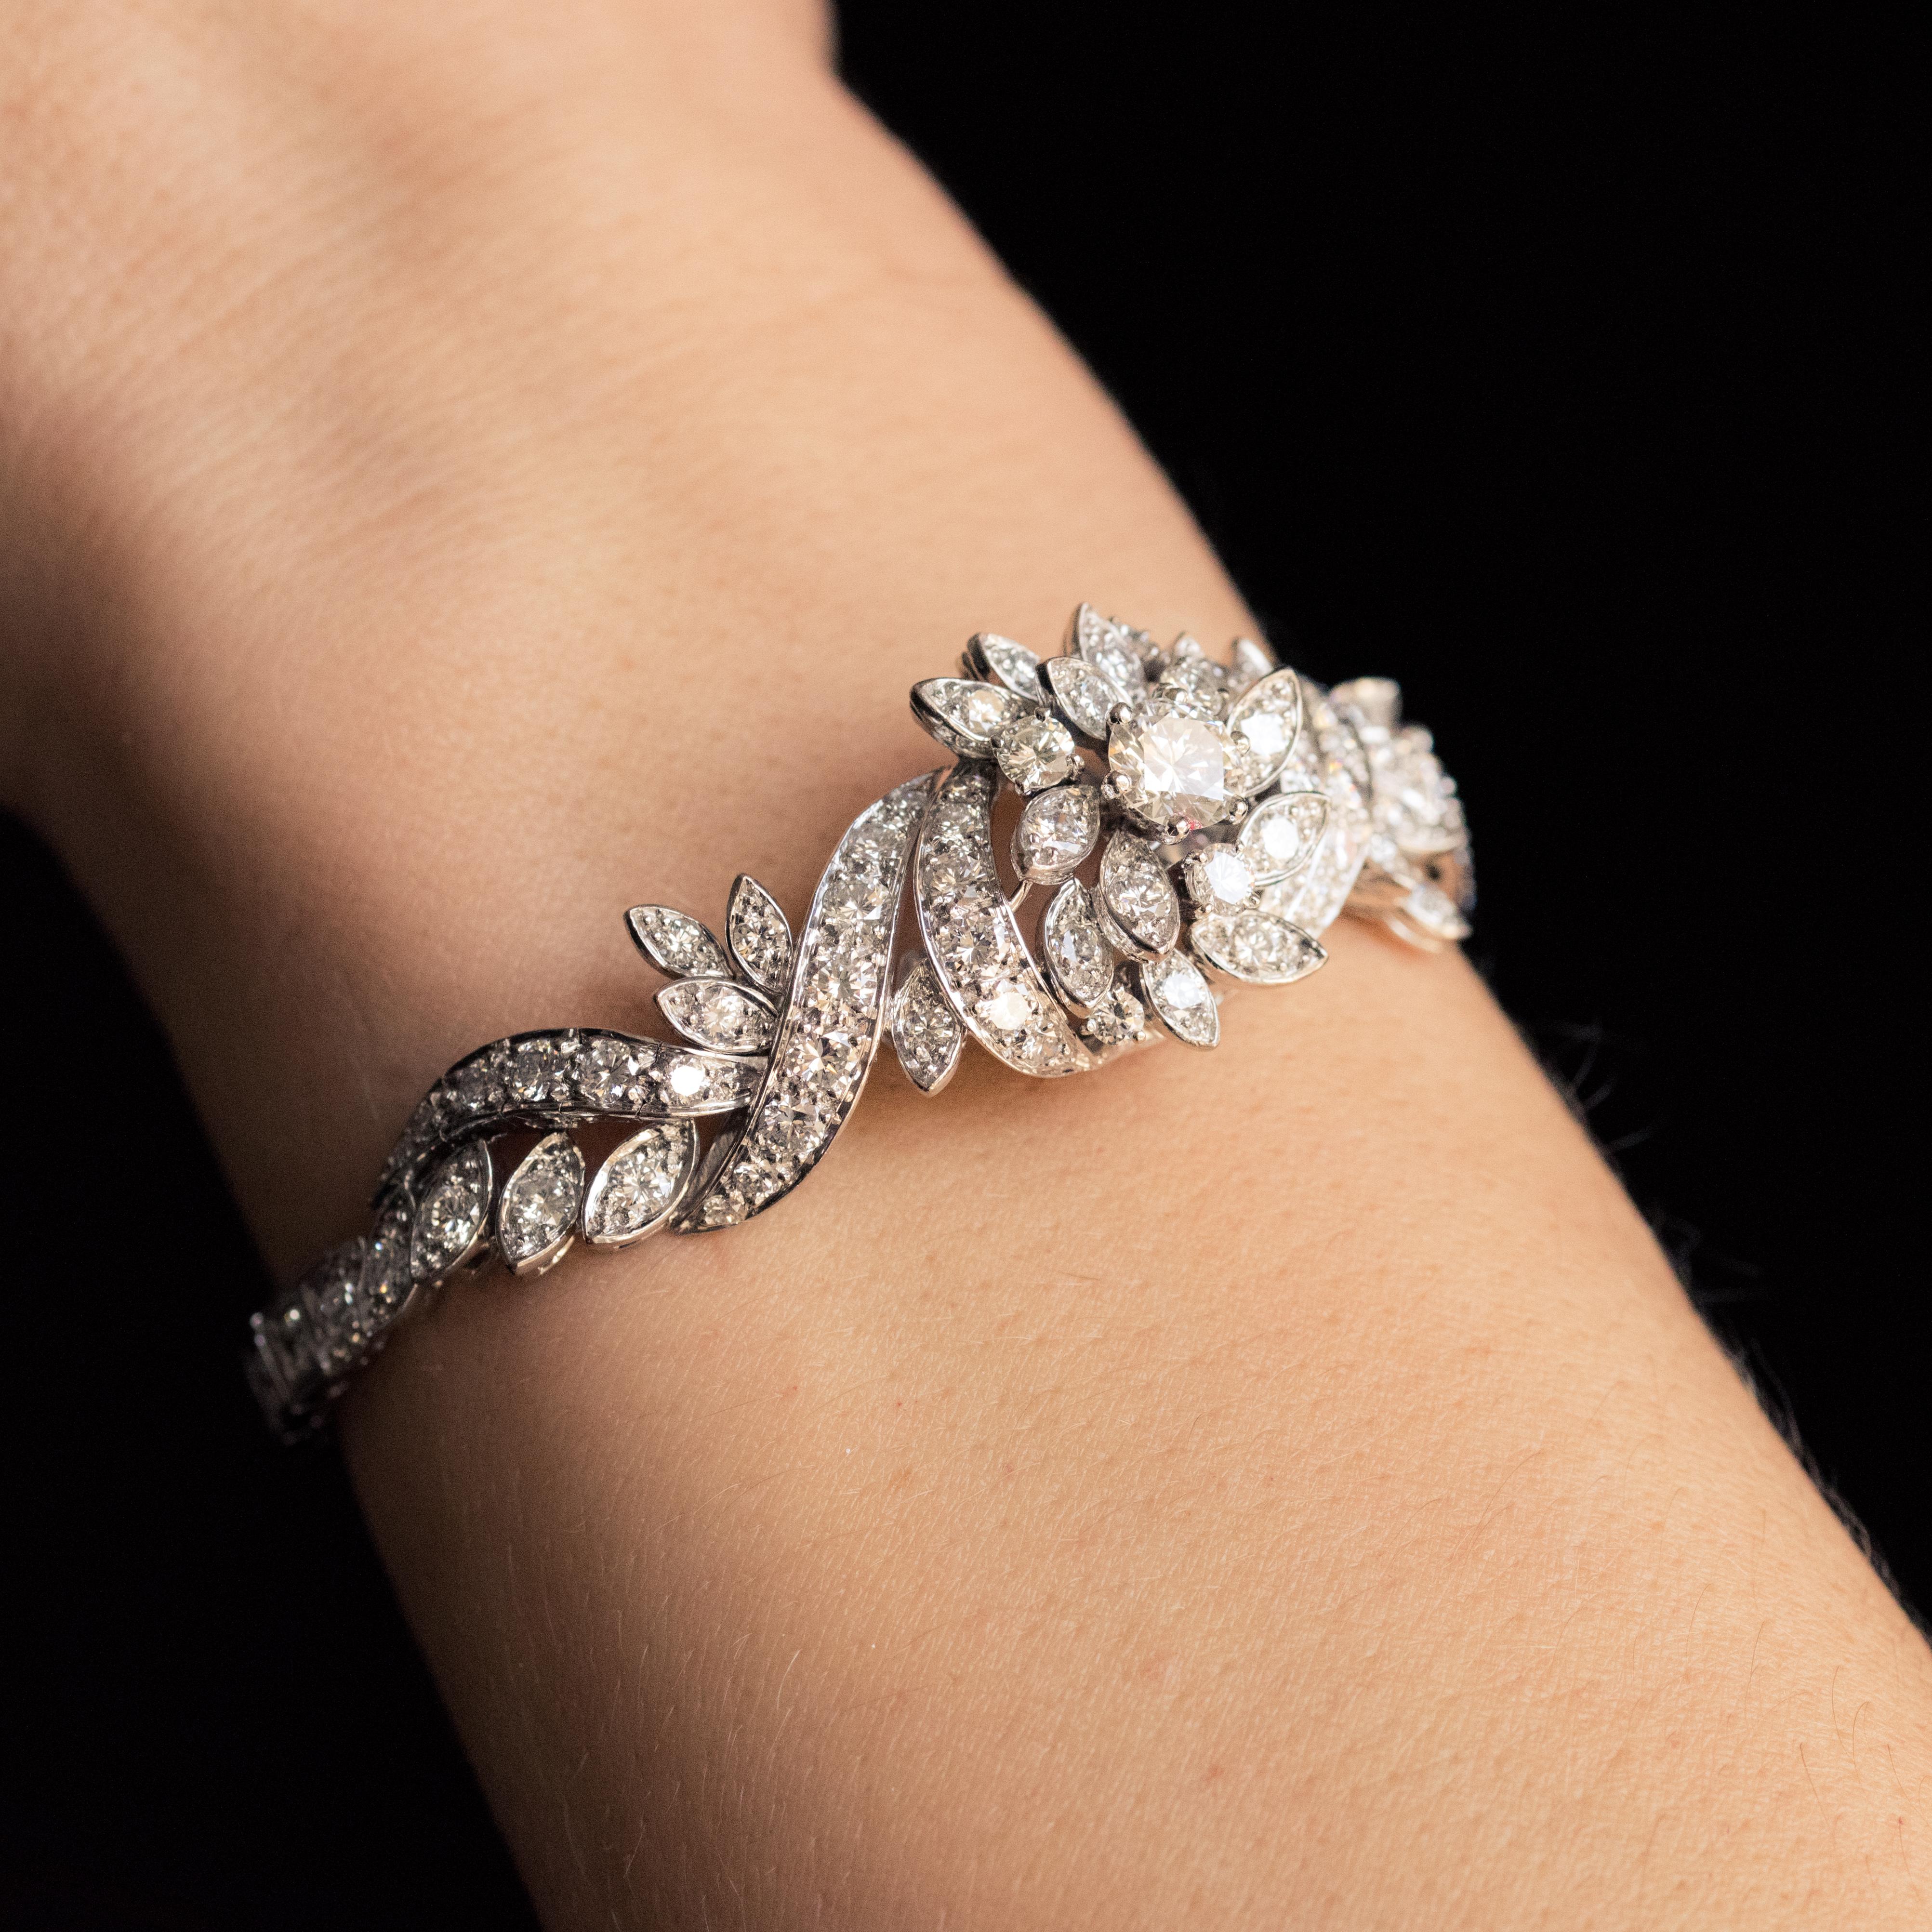 Bracelet in 18 karat white gold.
Sublime piece of retro jewelry, this antique bracelet forms on the top an openwork bouquet with flower, leaves and ribbons all adorned with brilliant-cut diamonds. On either side, the rest of the bracelet is a line